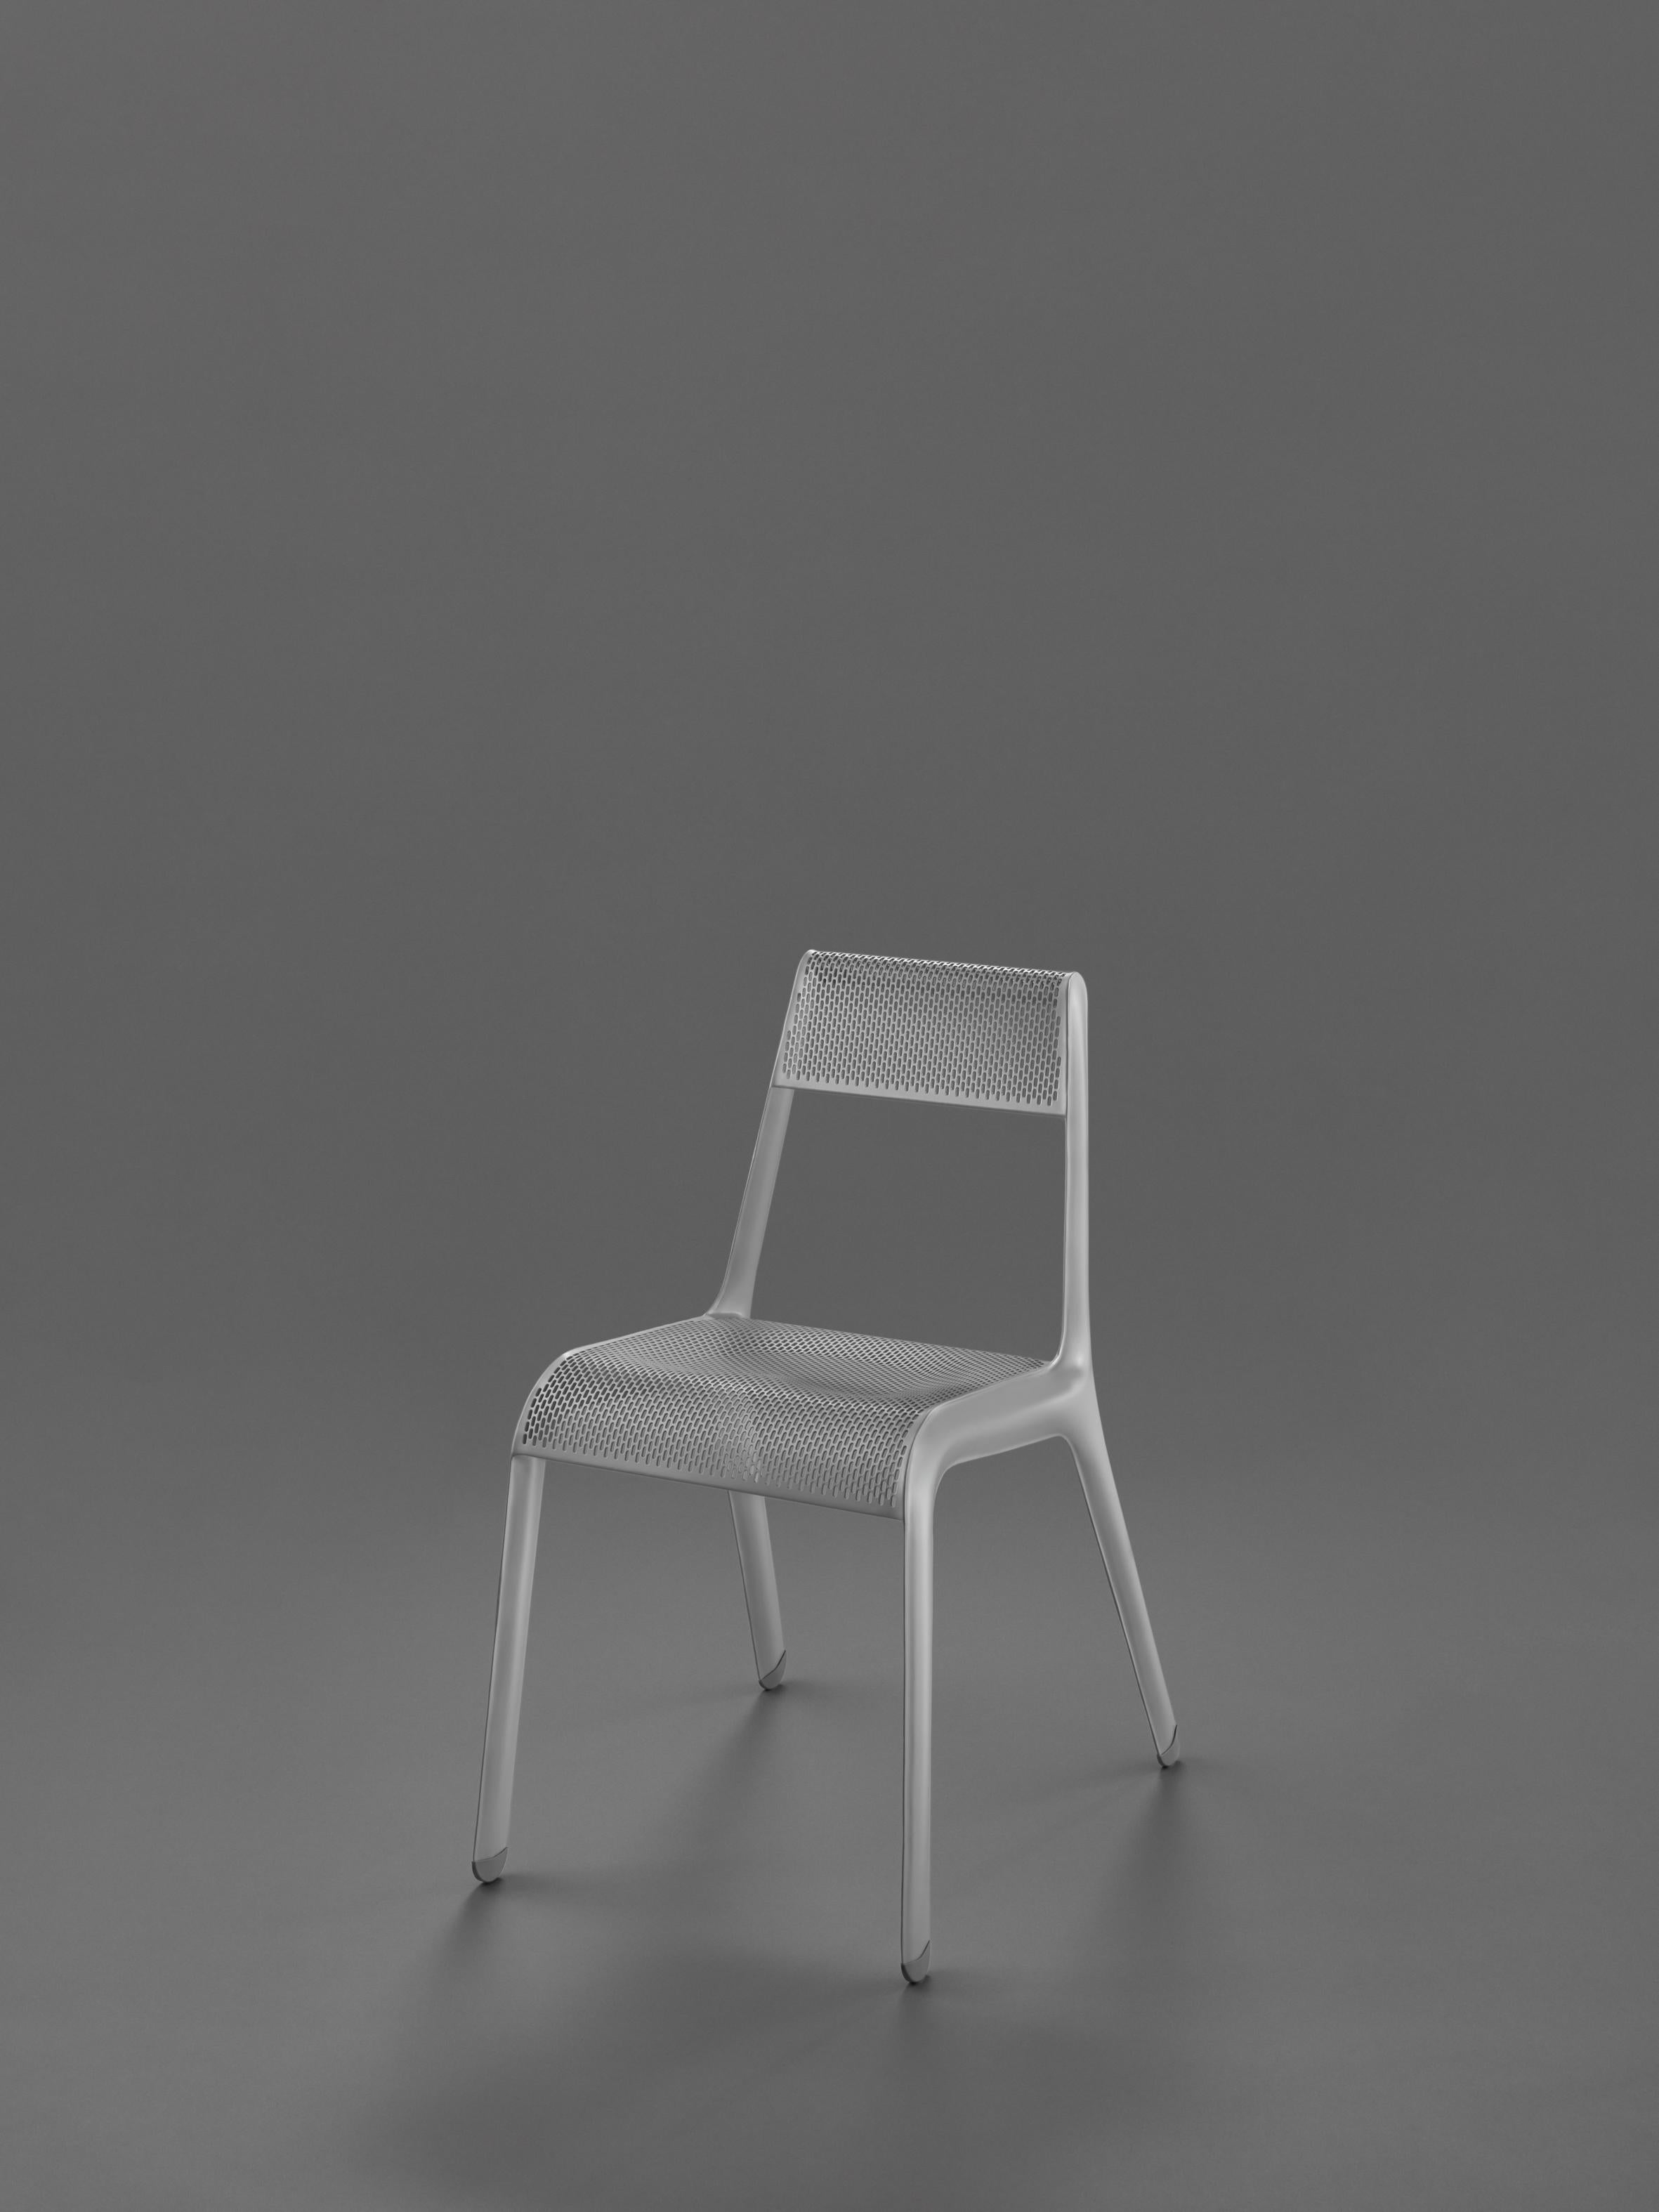 Natural Anodic Ultraleggera chair by Zieta
Dimensions: D 58 x W 49 x H 78 cm 
Material: Aluminum.
Finish: Powder-Coated.
Available in other colors. Also available in Leggera version.


Ultraleggera is a minimalist light metal chair. Thanks to its